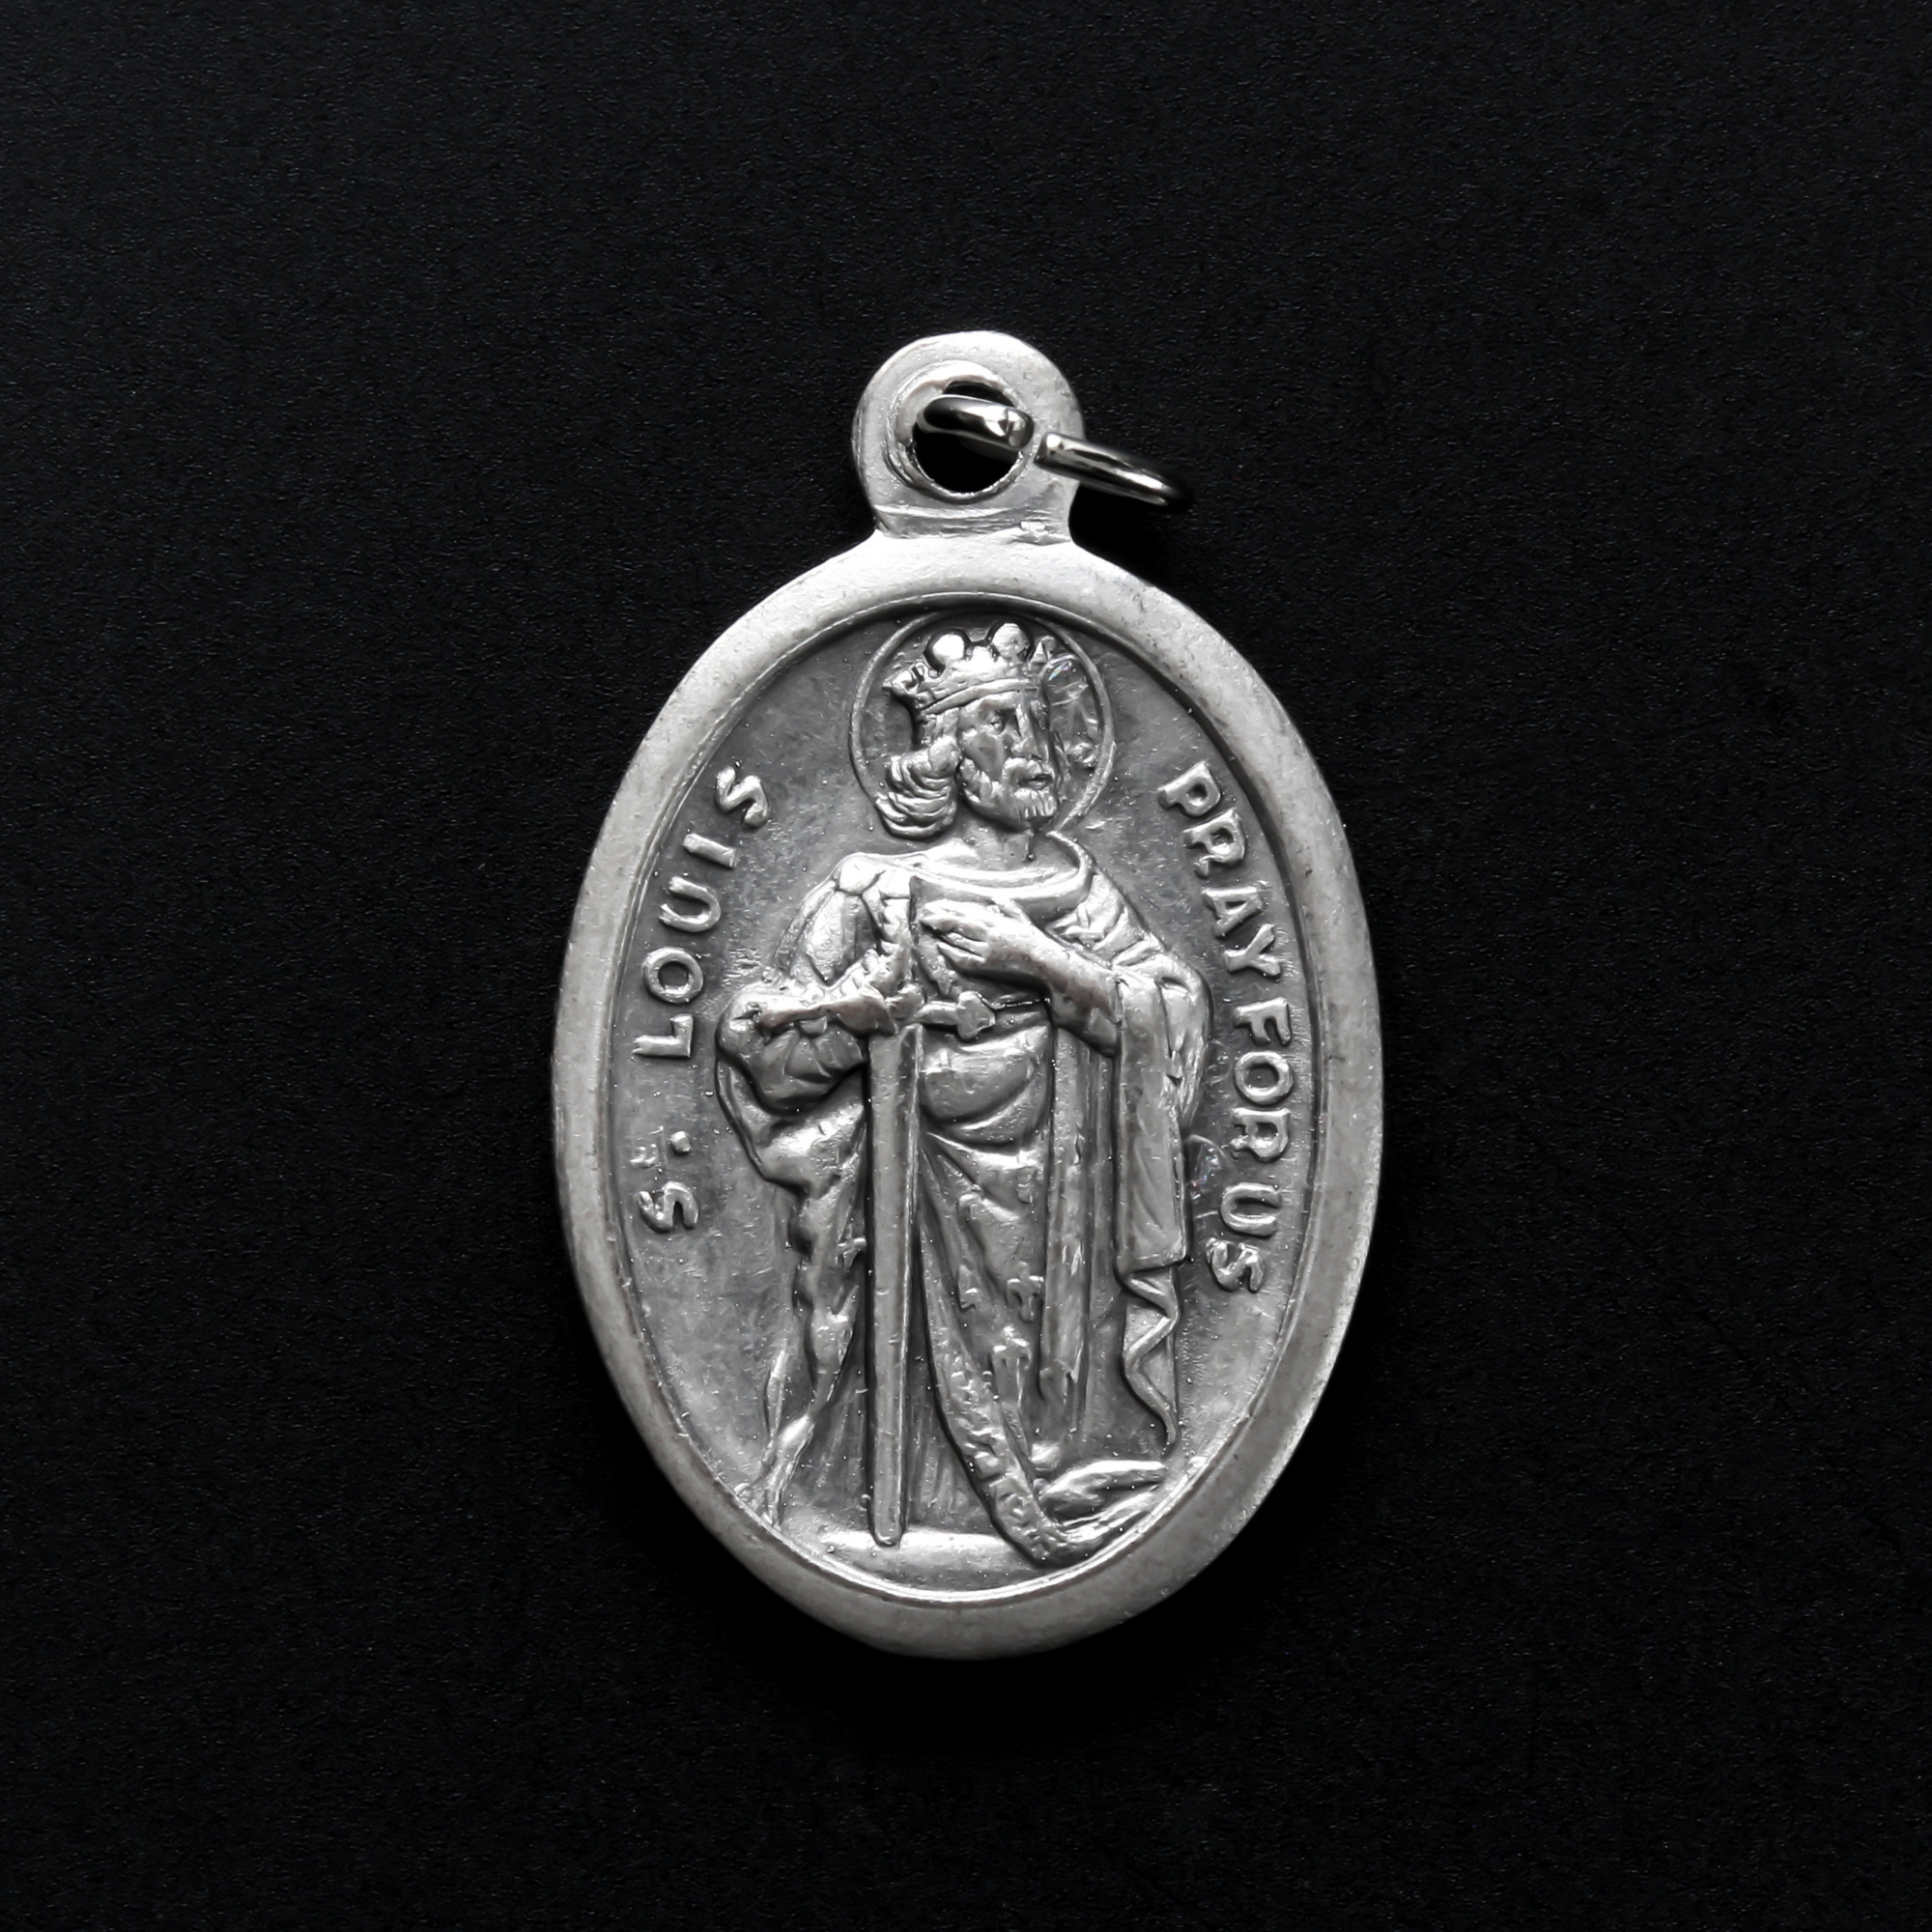 Saint Louis IX of France medal that depicts the saint on the front and is marked "Pray For Us" on the back.